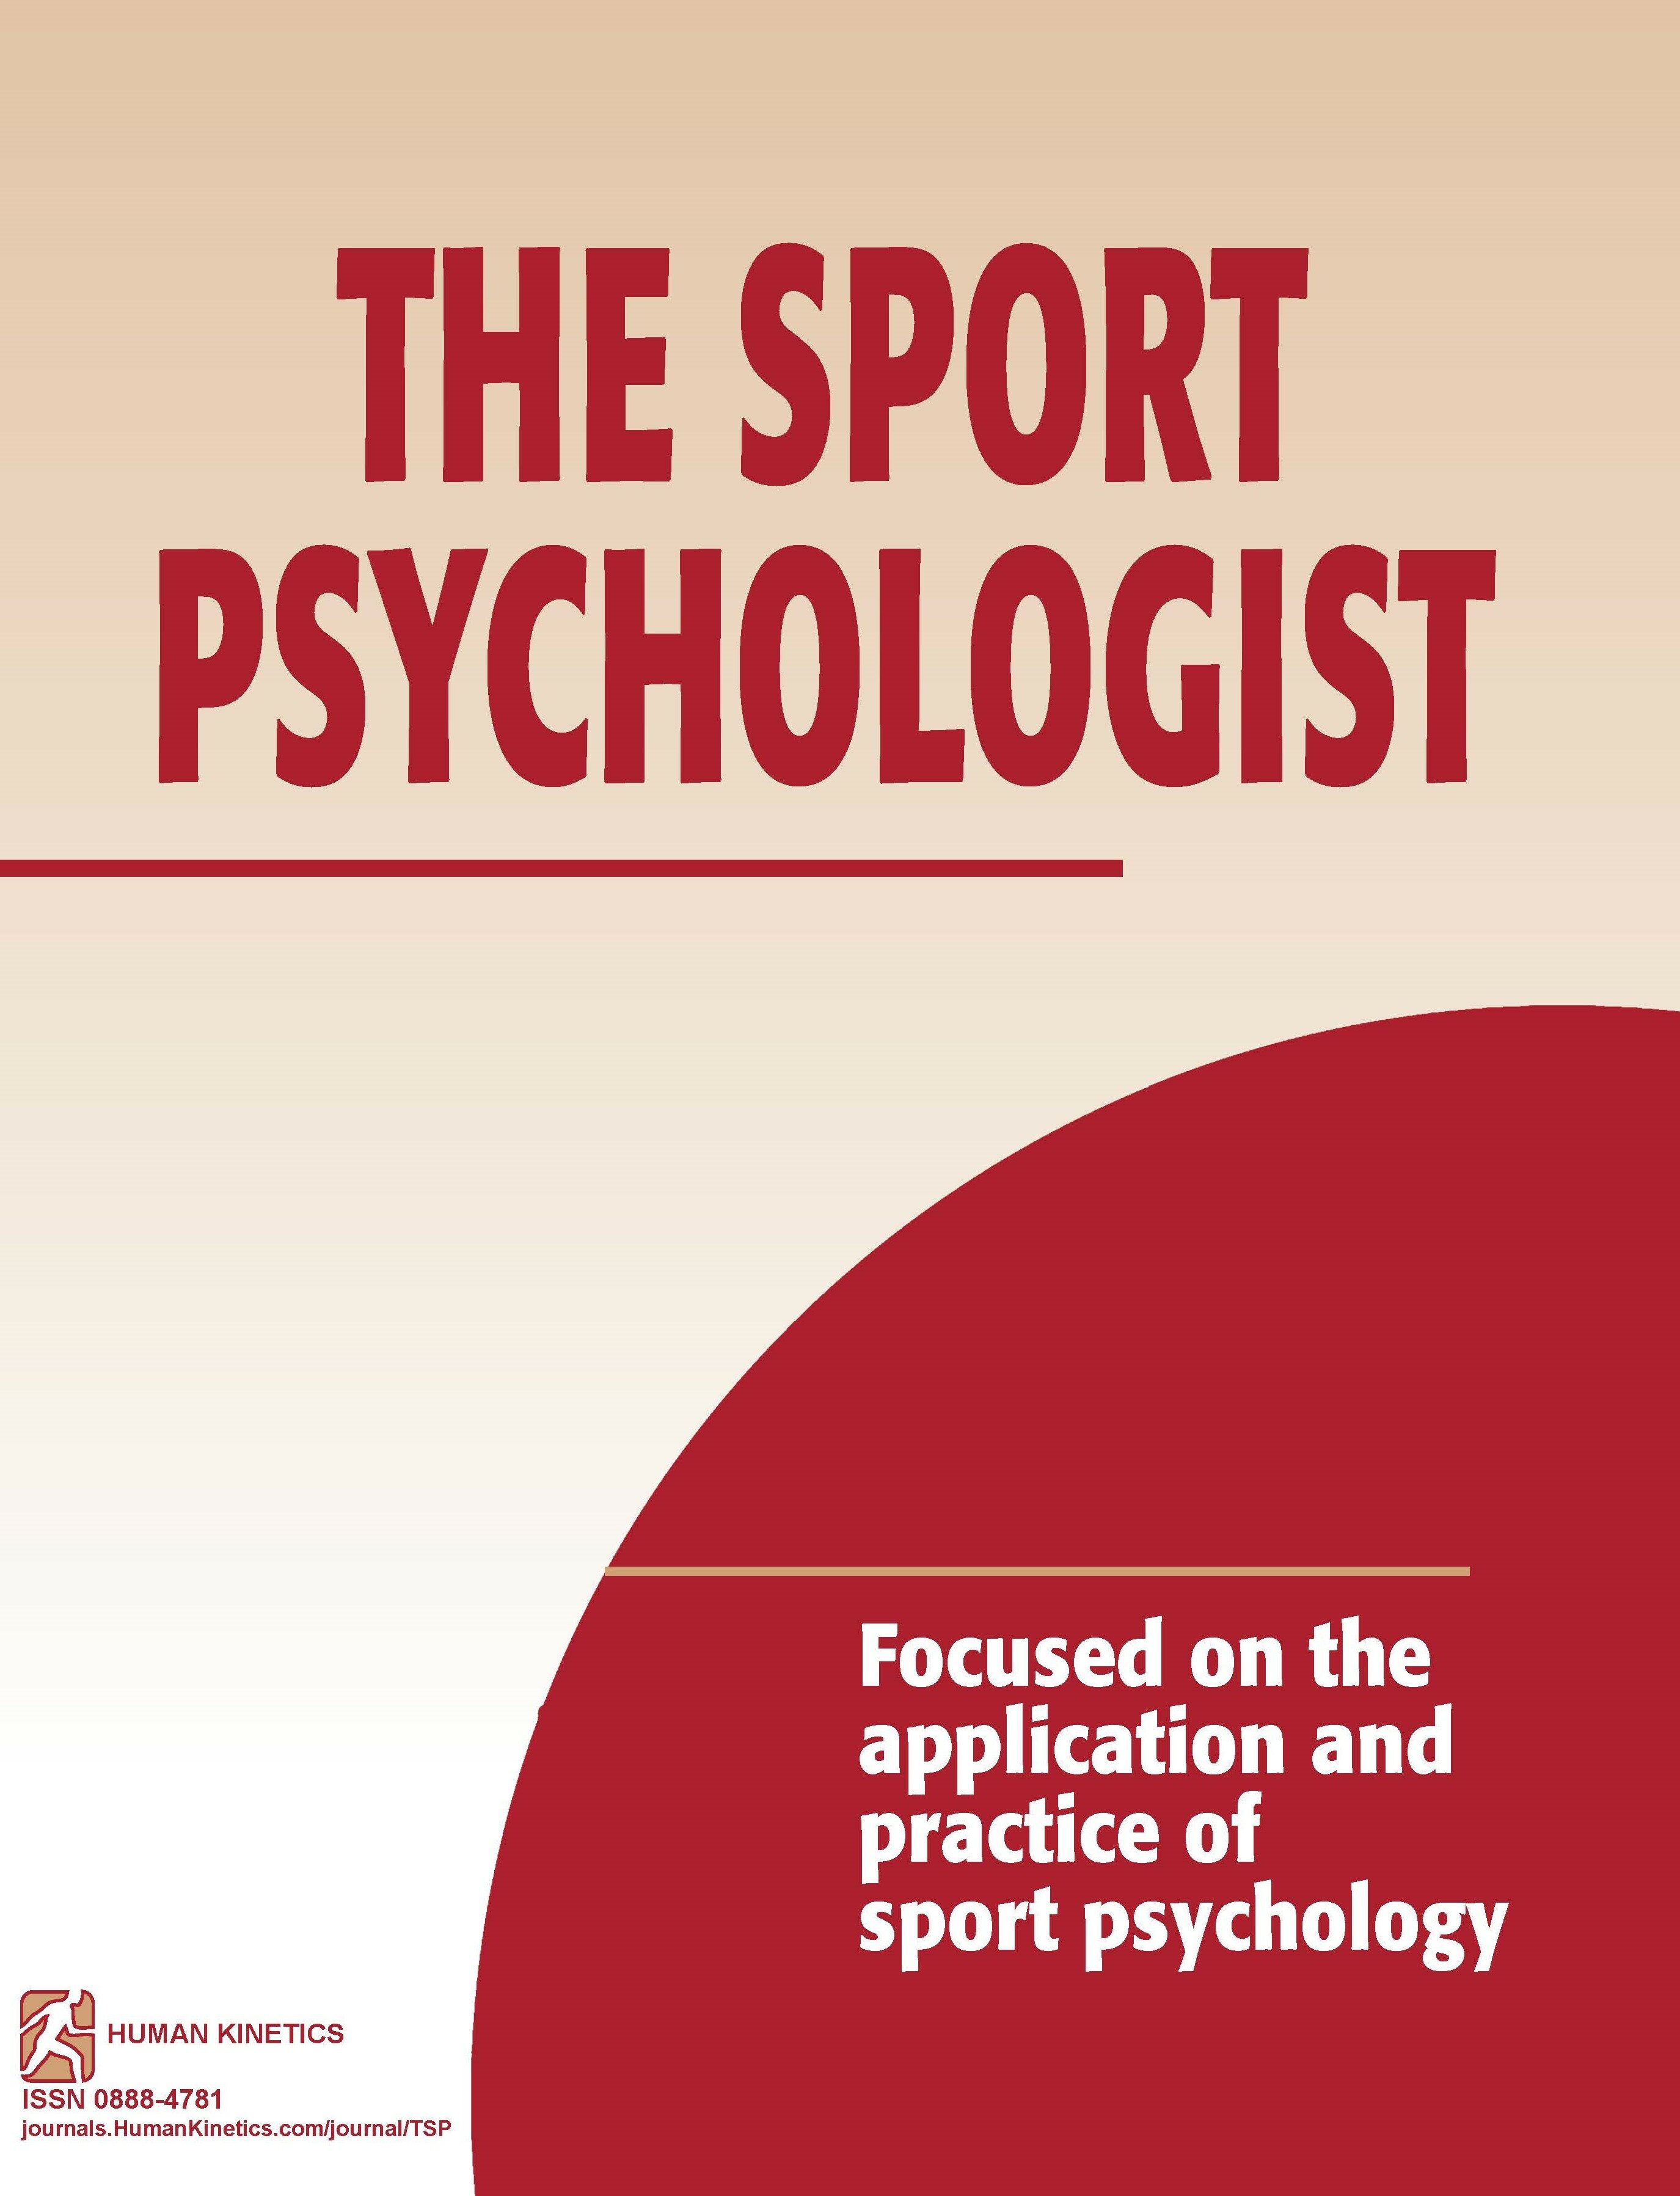 An Insight Into the Use of Personality Assessment by U.K. Sport Psychology Consultants